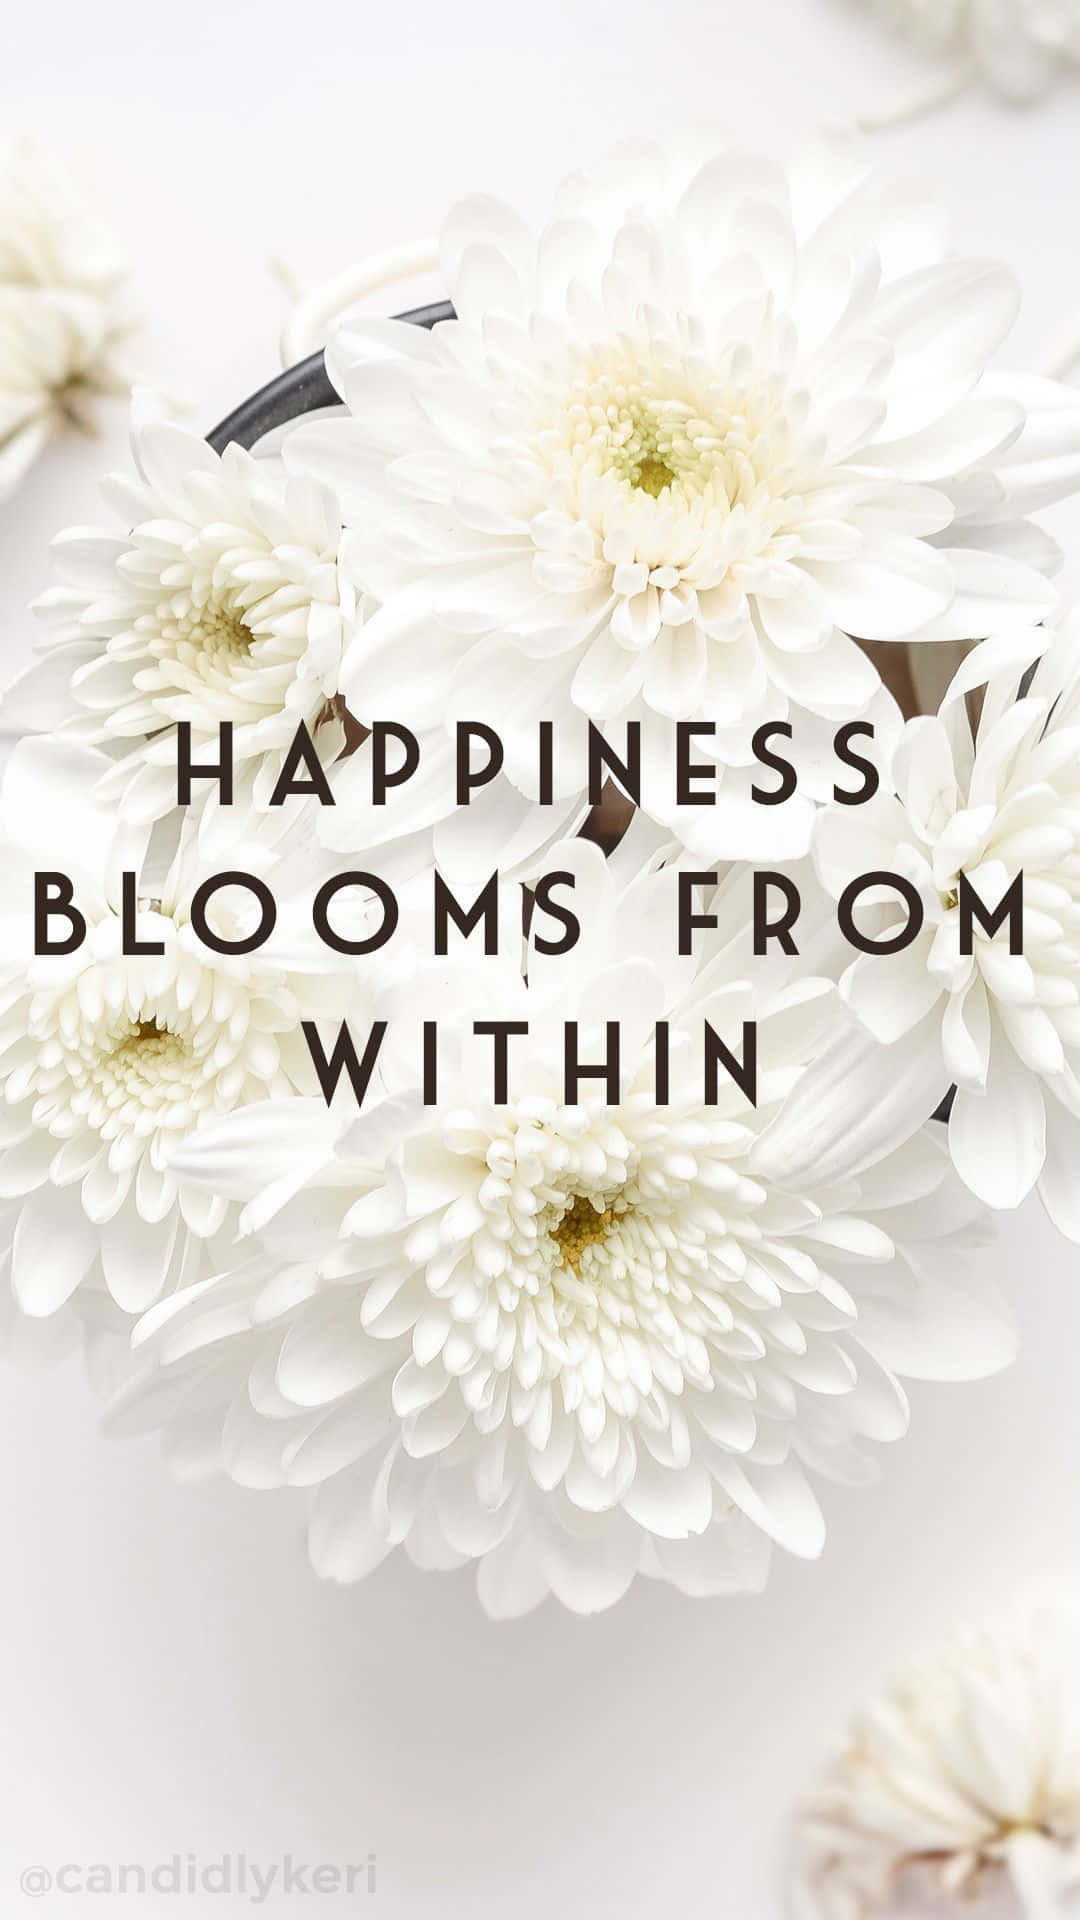 Happiness Blooms From Within Wallpaper